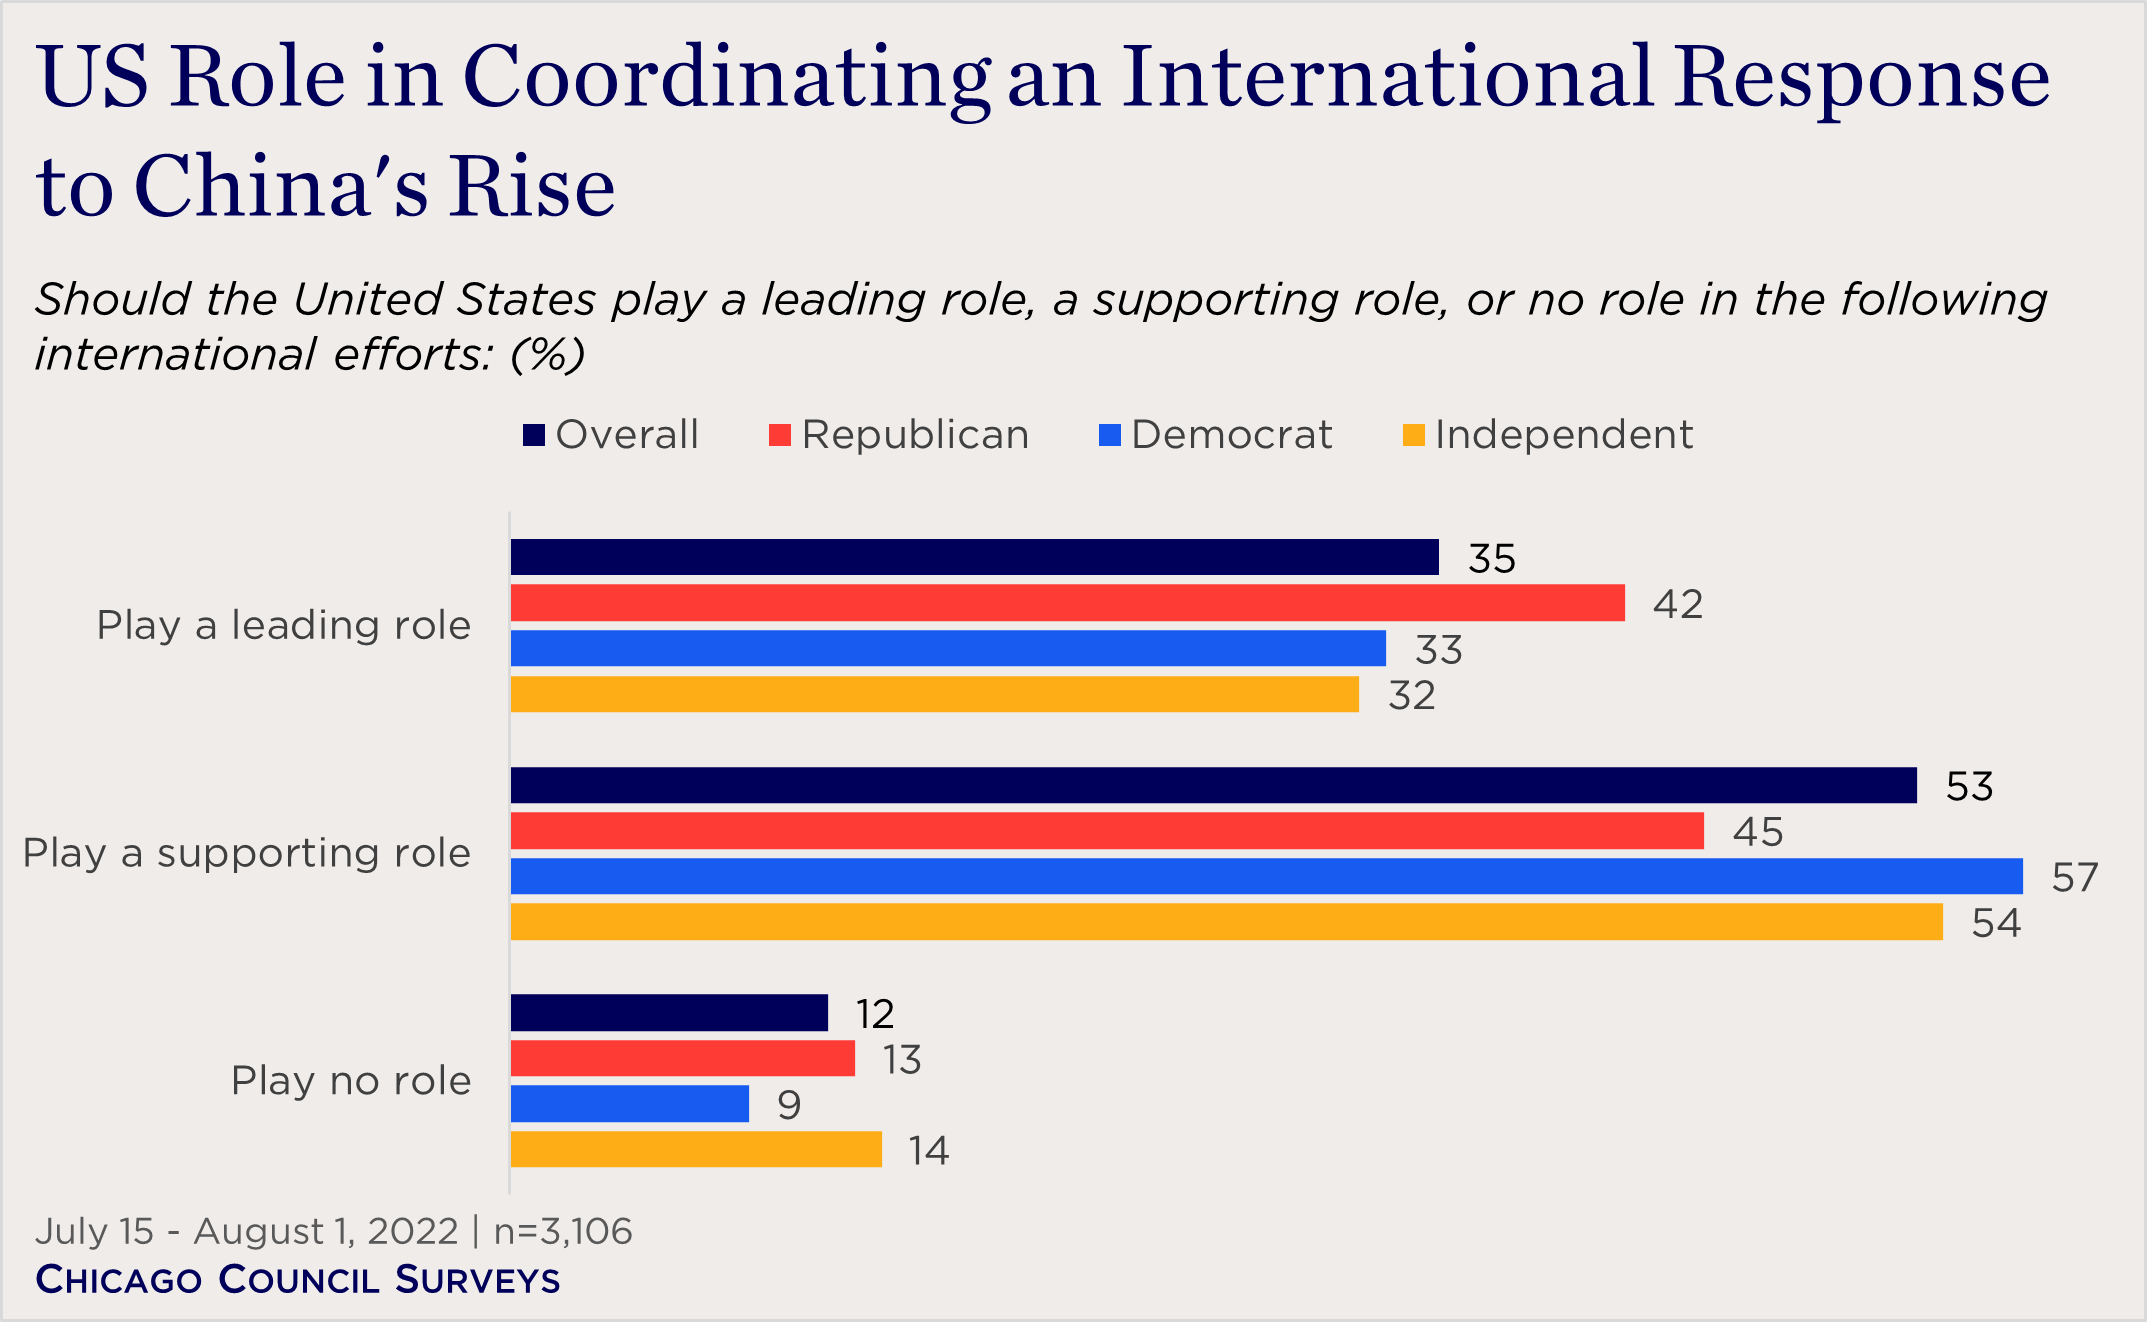 "bar chart showing partisan views of the US role in coordinating an international response to China's rise"